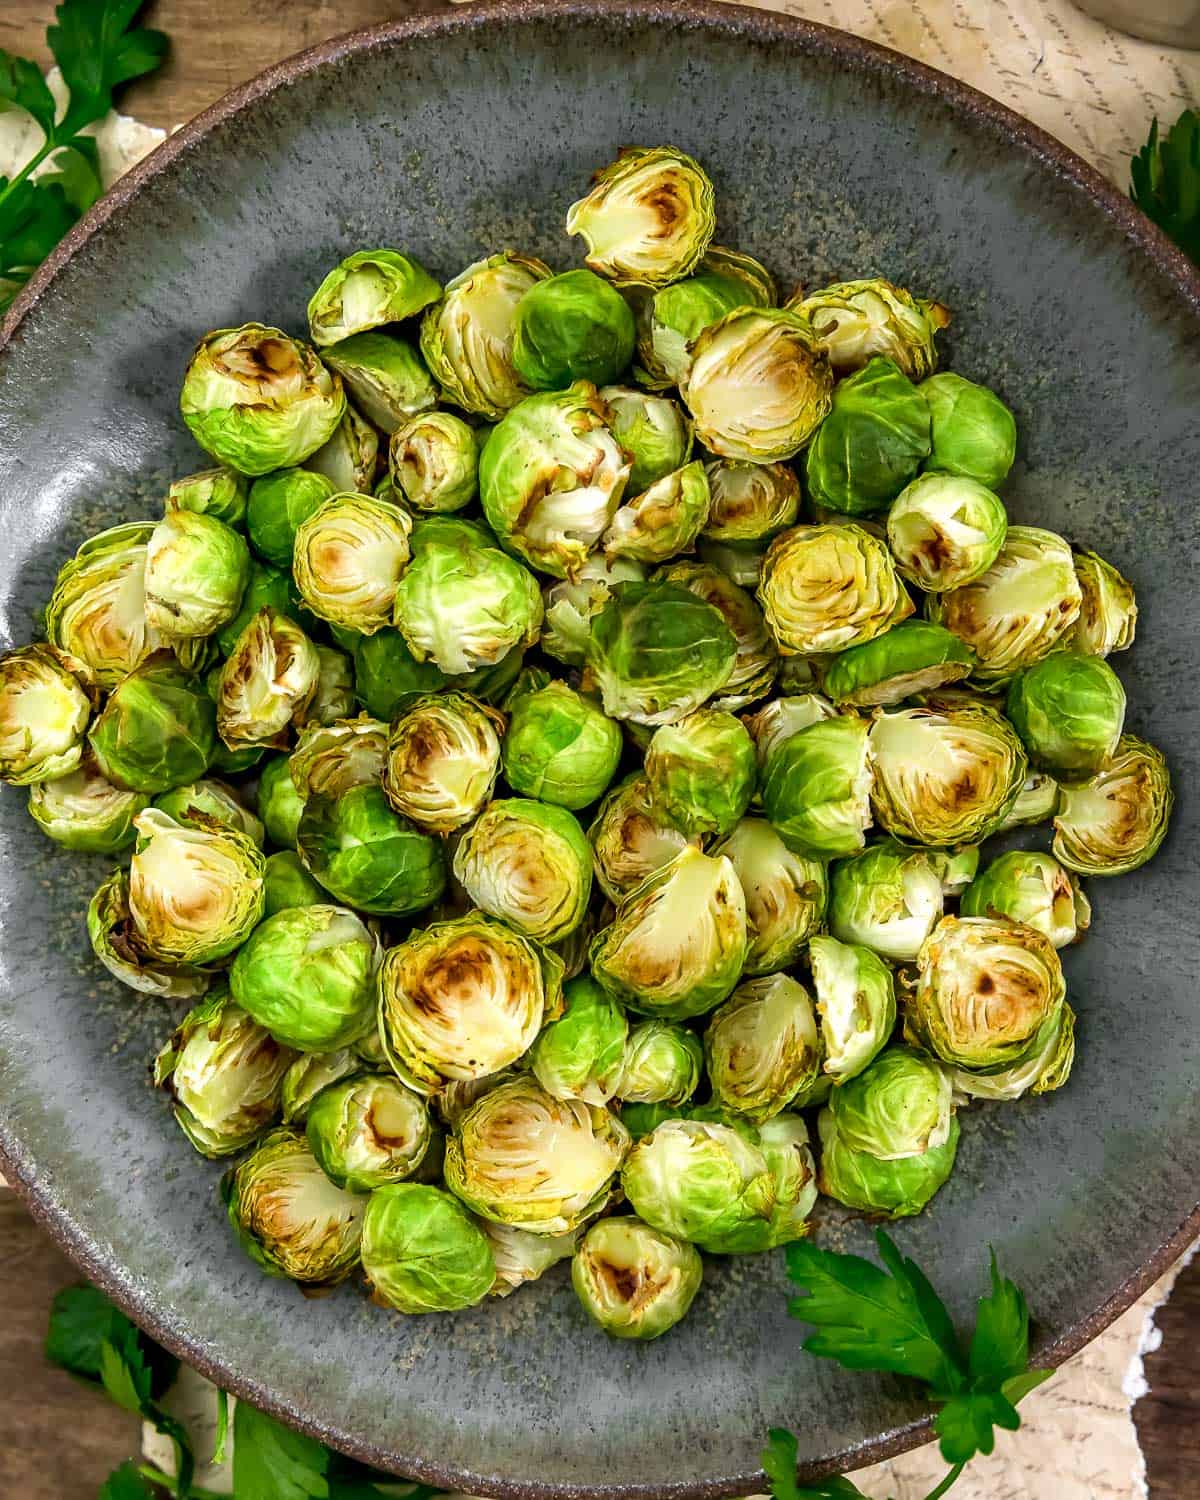 Roasted Oil Free Brussels Sprouts in a bowl